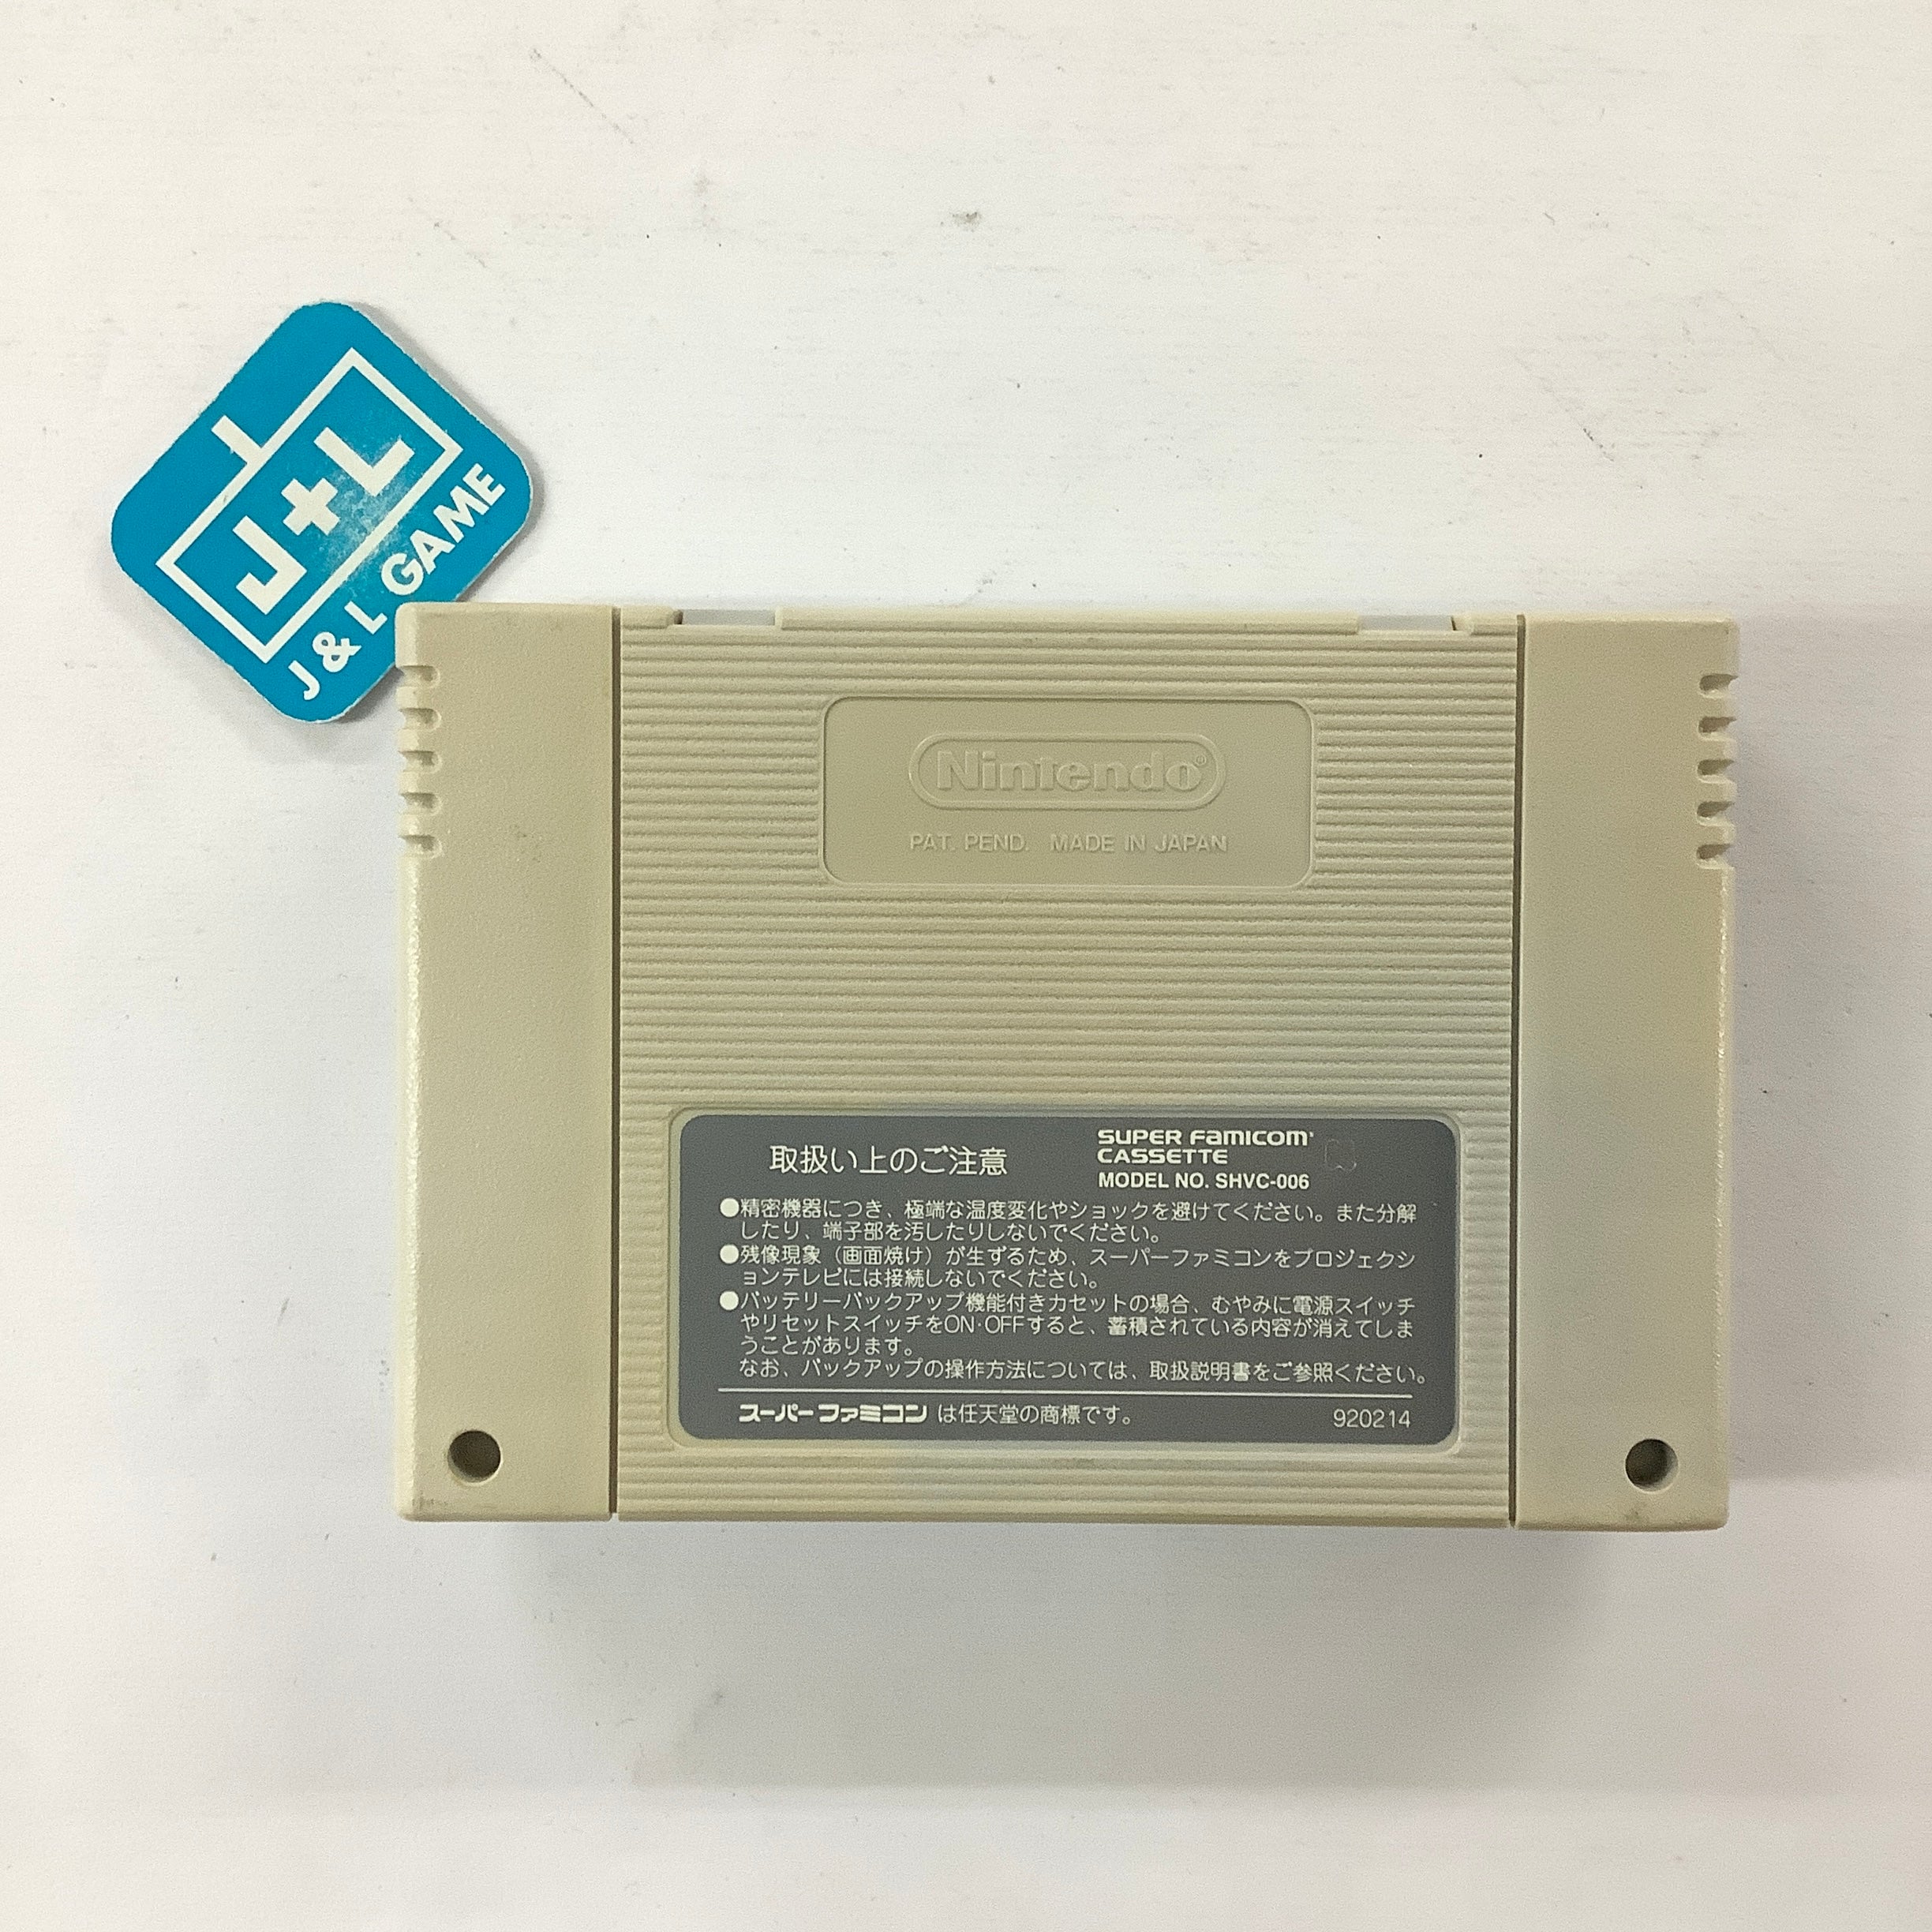 Cameltry - (SFC) Super Famicom [Pre-Owned] (Japanese Import) Video Games Taito Corporation   